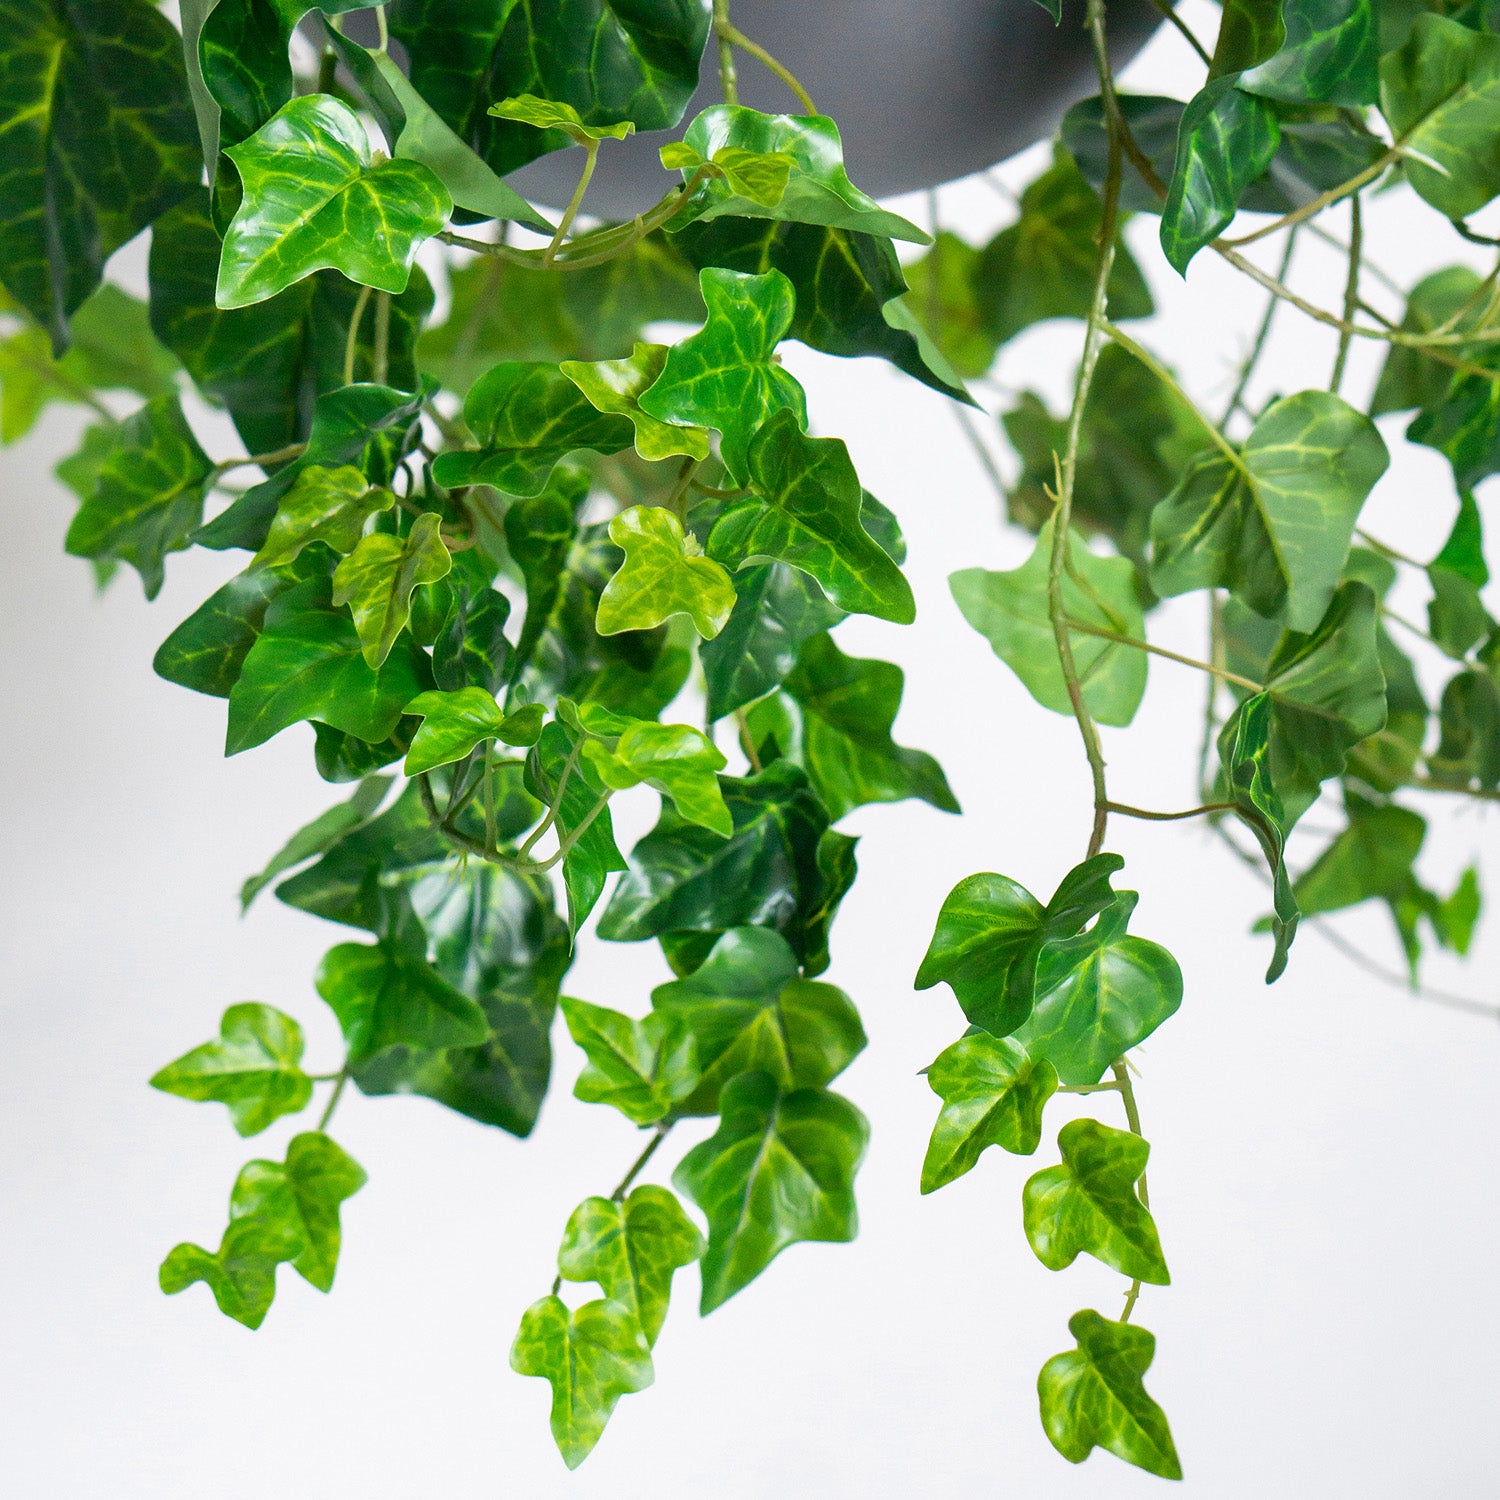 Hanging Planter with English Ivy